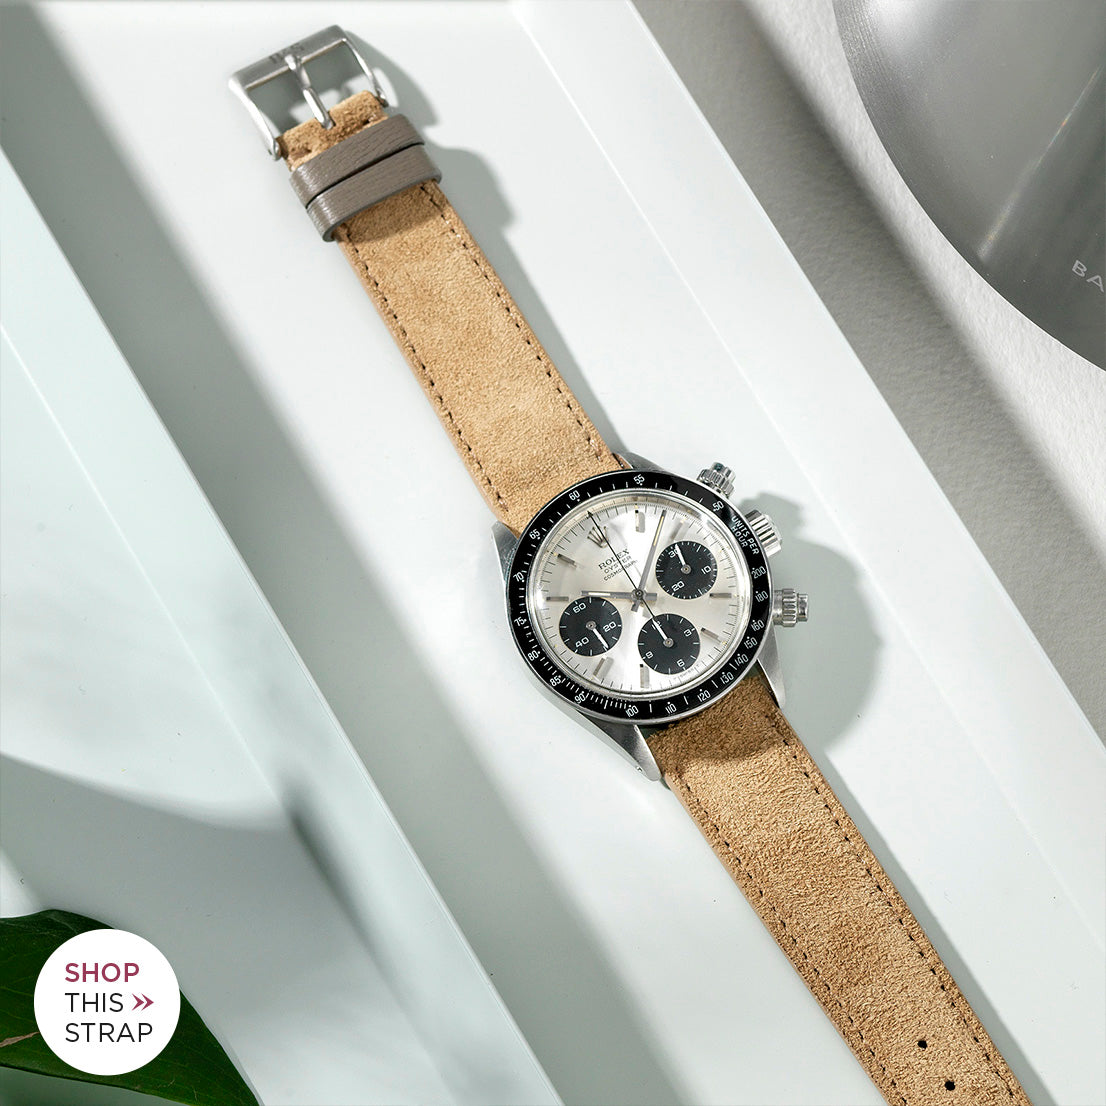 Bulang and Sons_Strap Guide_The Rolex Daytona 6263_Refined Light Brown Suede Leather Watch Strap